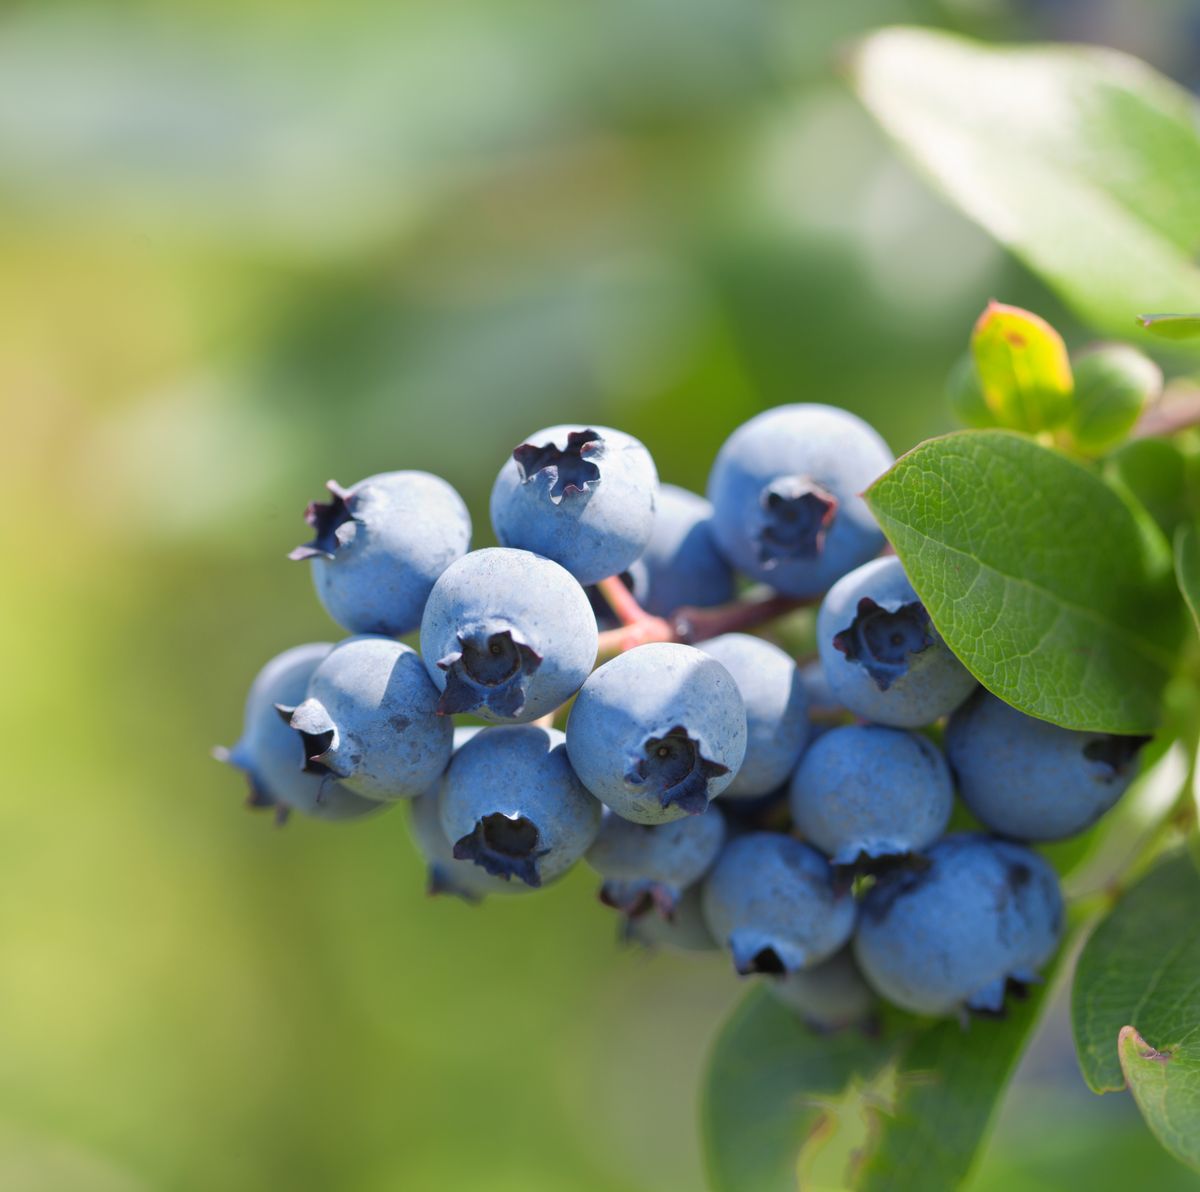 How To Grow Blueberries - Best Blueberry Growing Guide